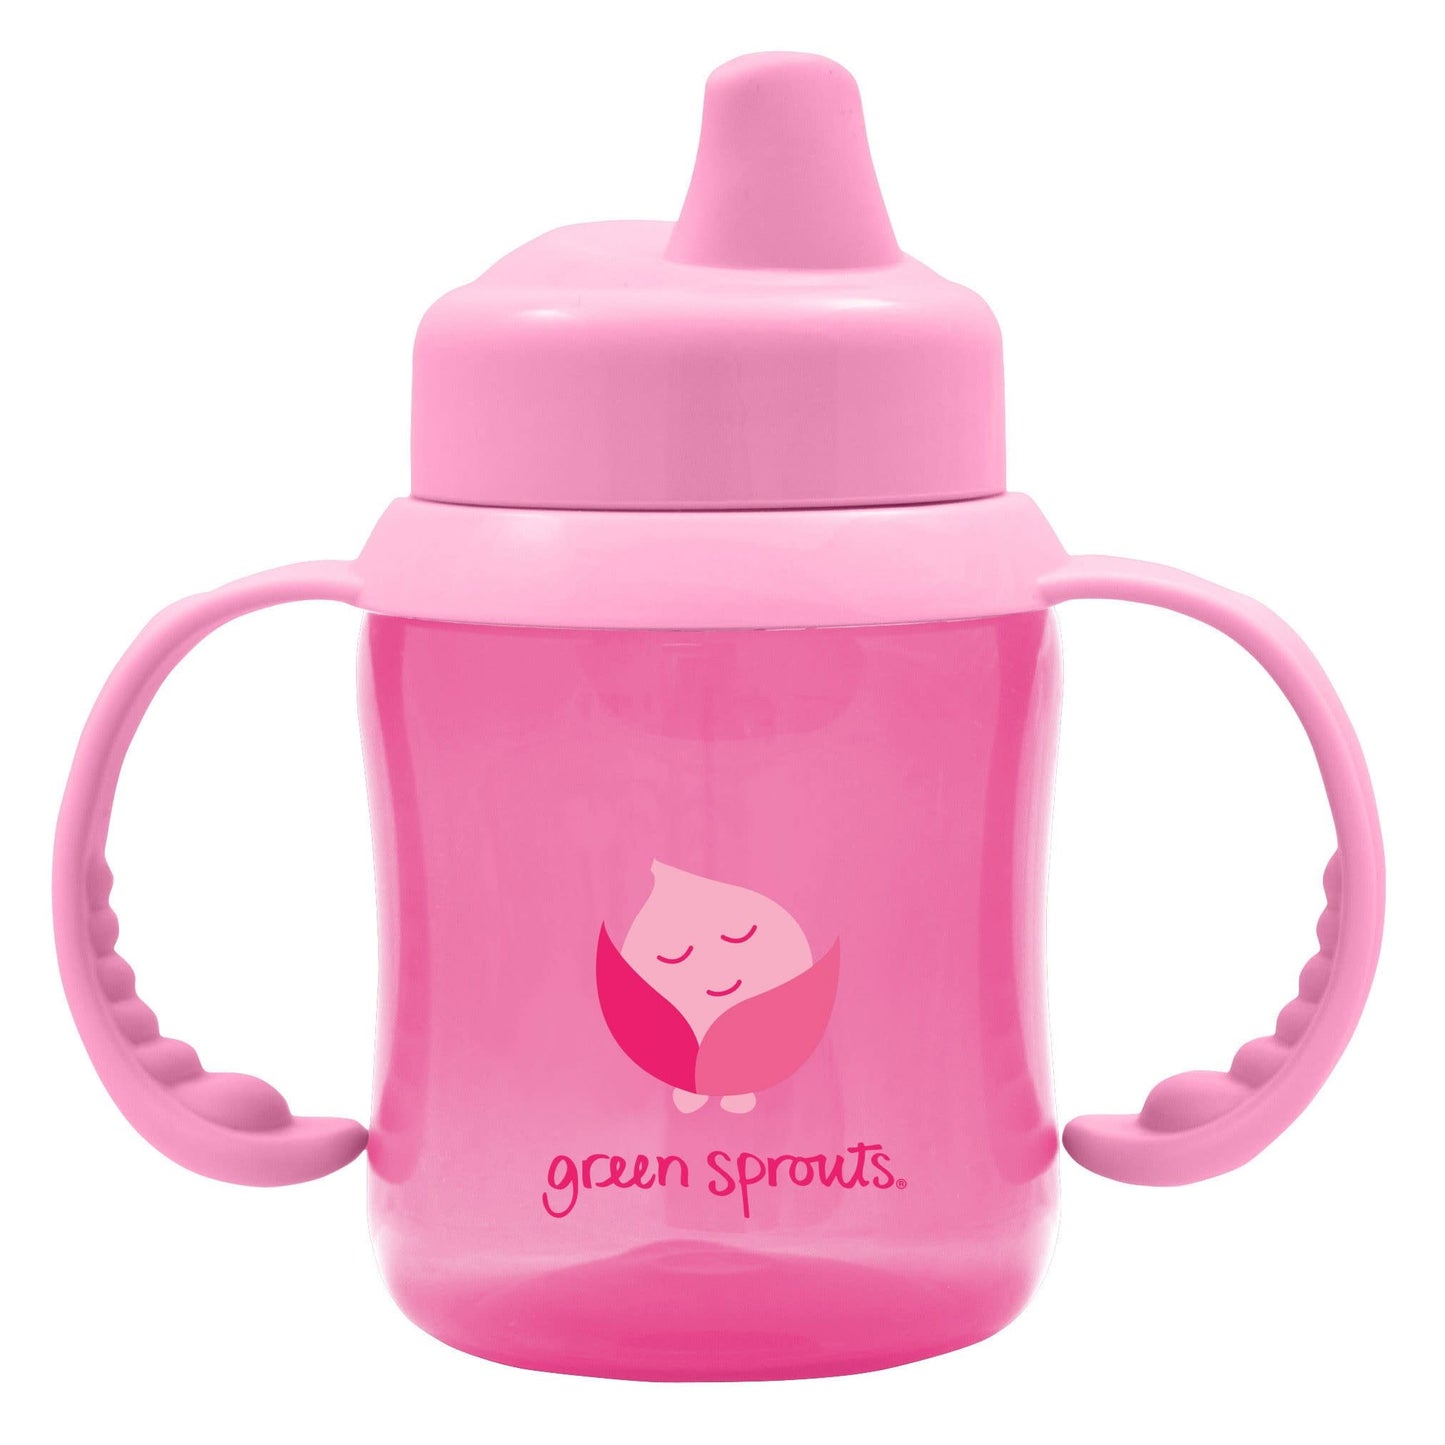 Green Sprouts Non Spill Sippy Cup